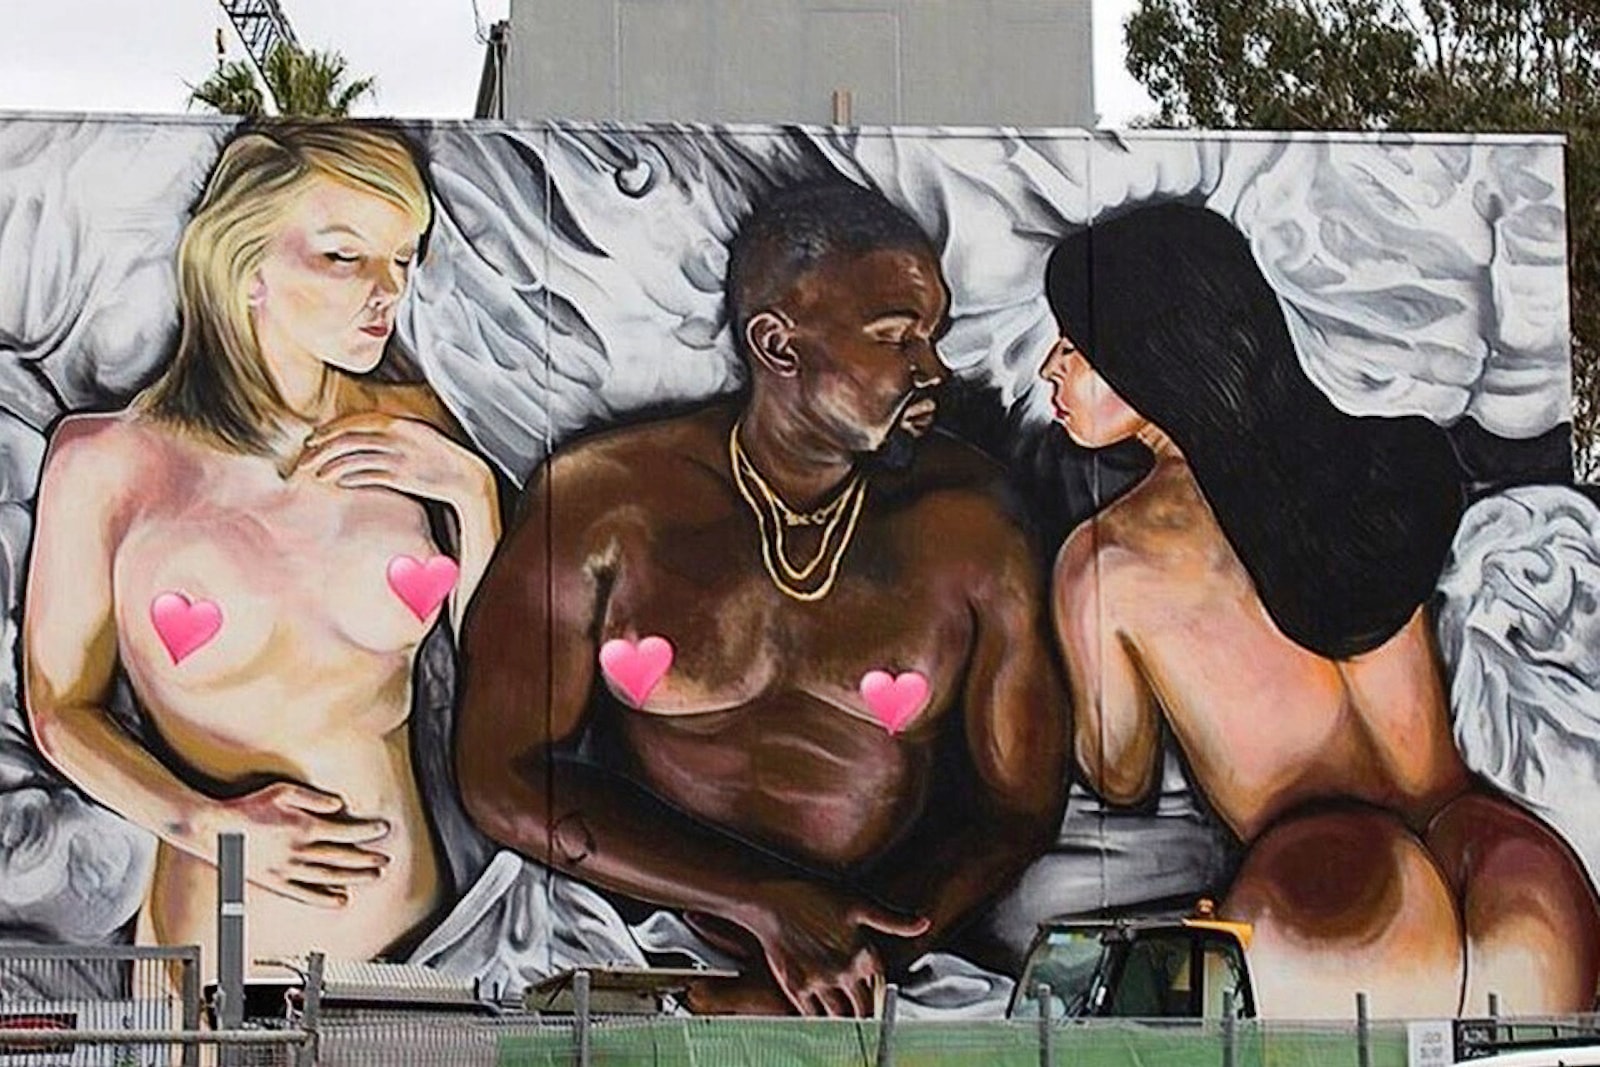 Kanye West Famous Mural Lushsux Painting Street Art